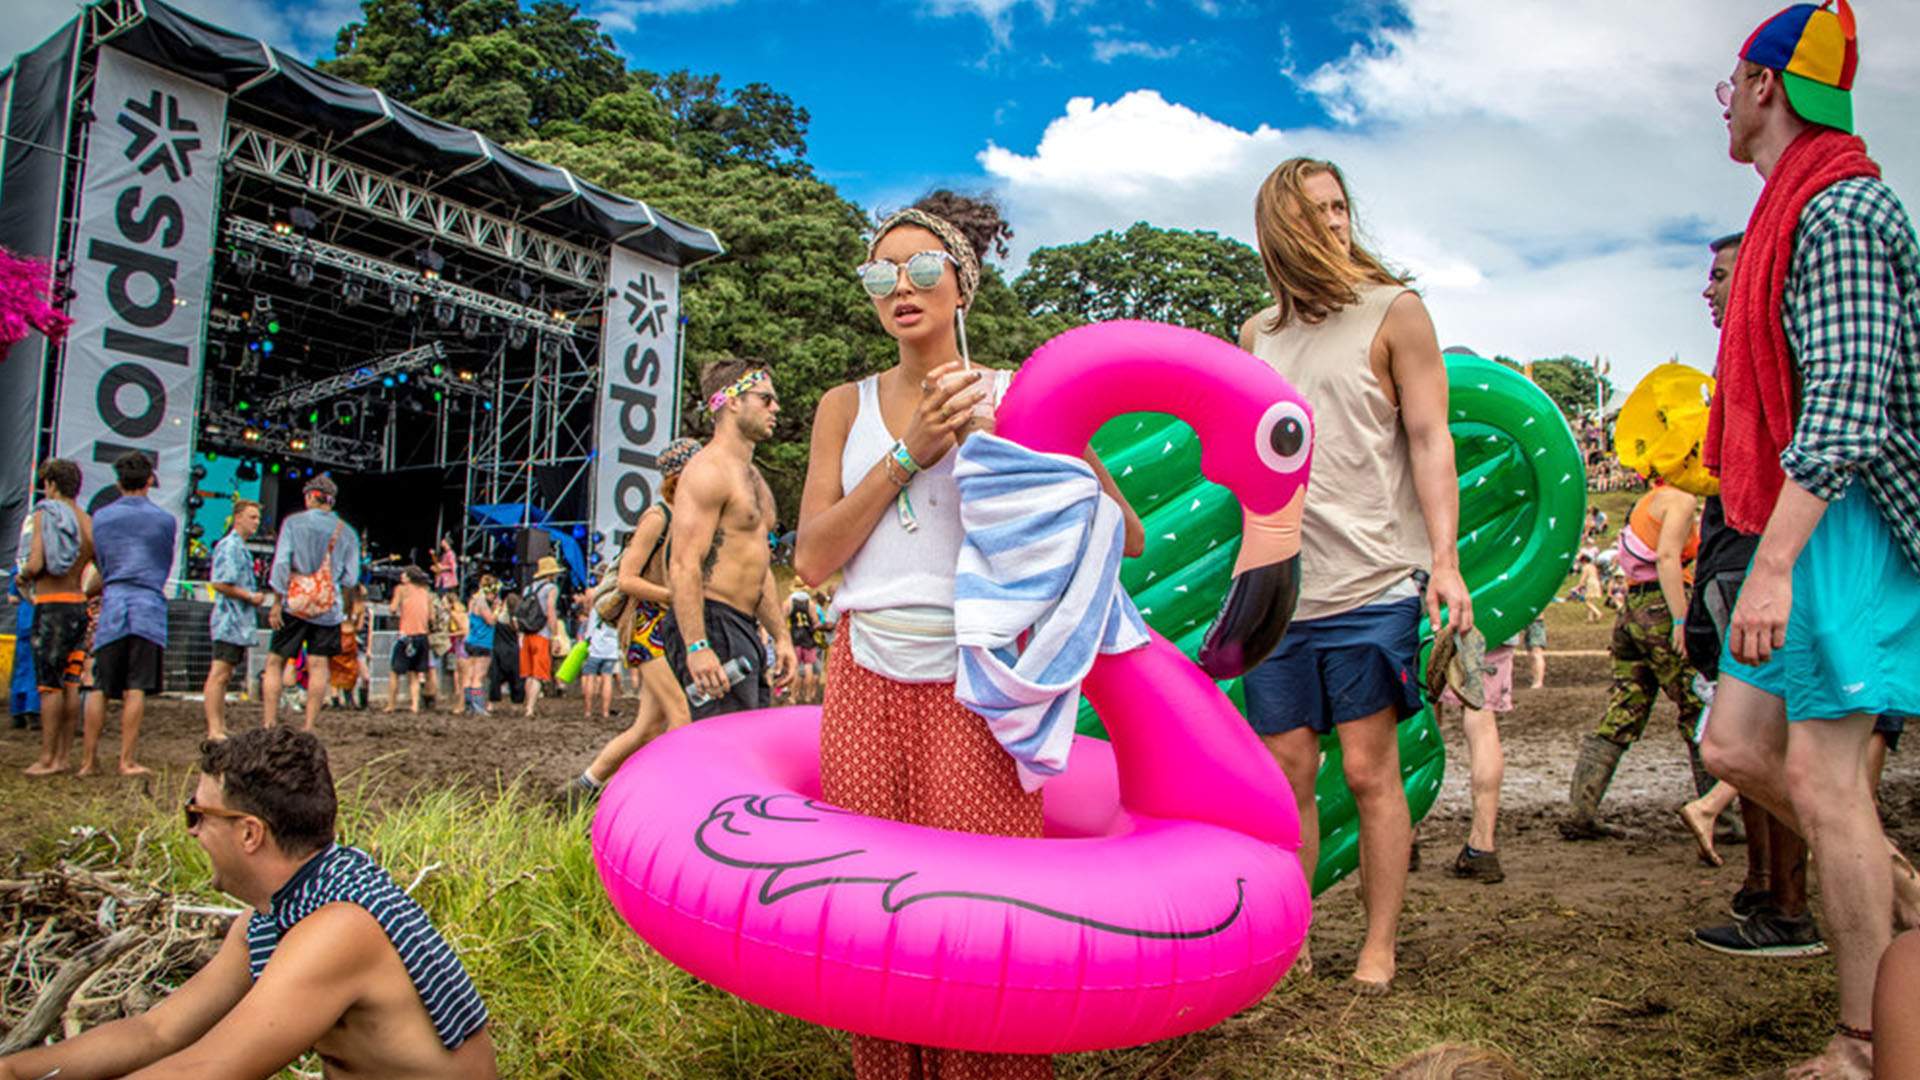 Your Guide to Splore 2018